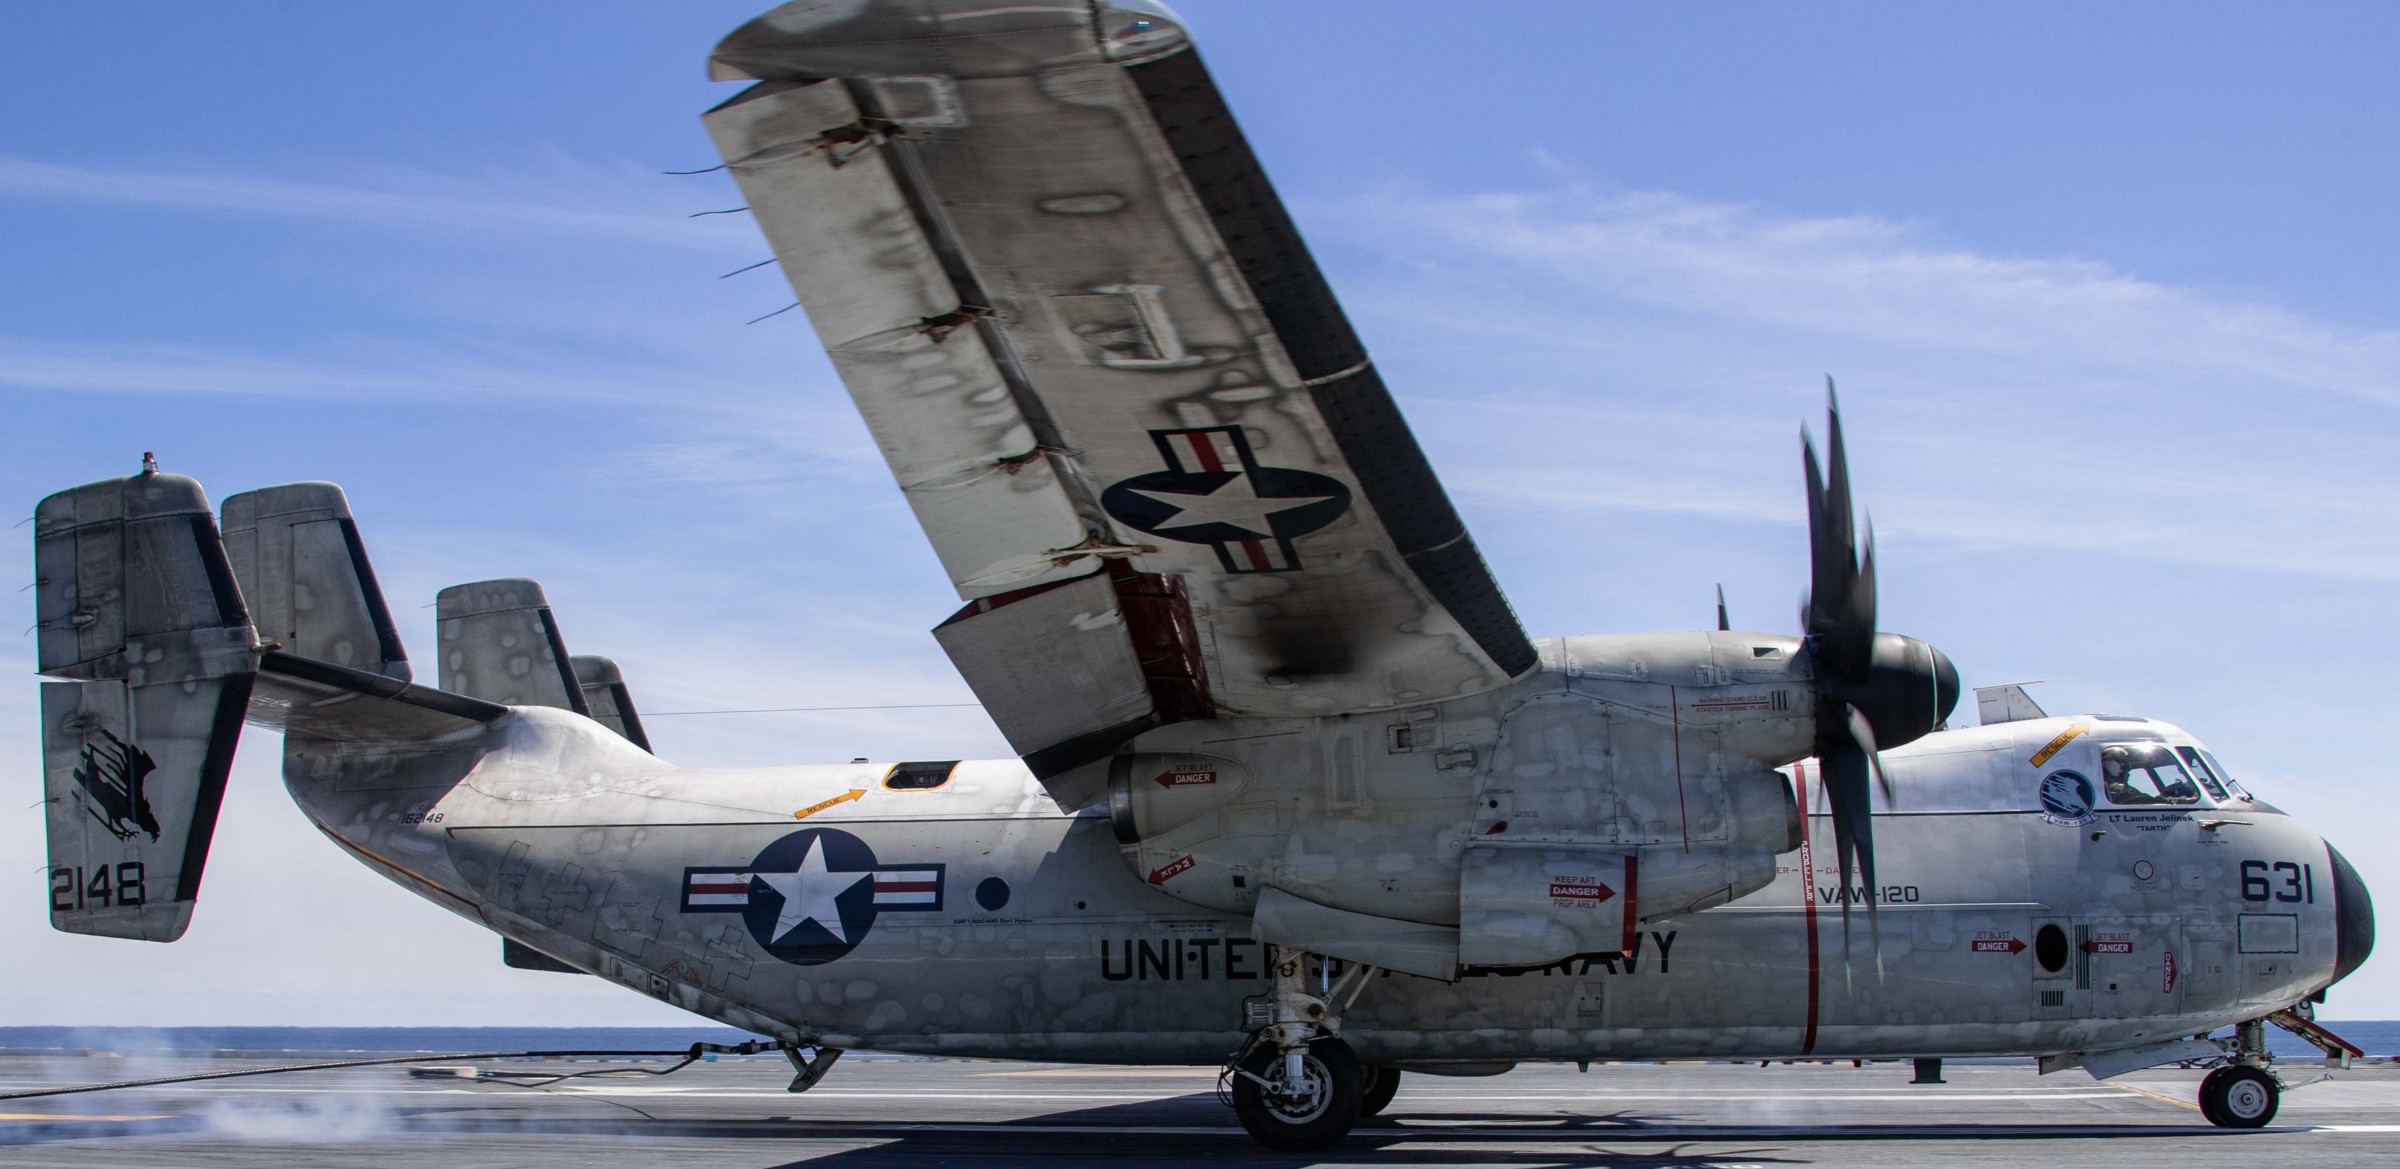 vaw-120 greyhawks airborne command control squadron c-2a greyhound replacement uss gerald r. ford cvn-78 36